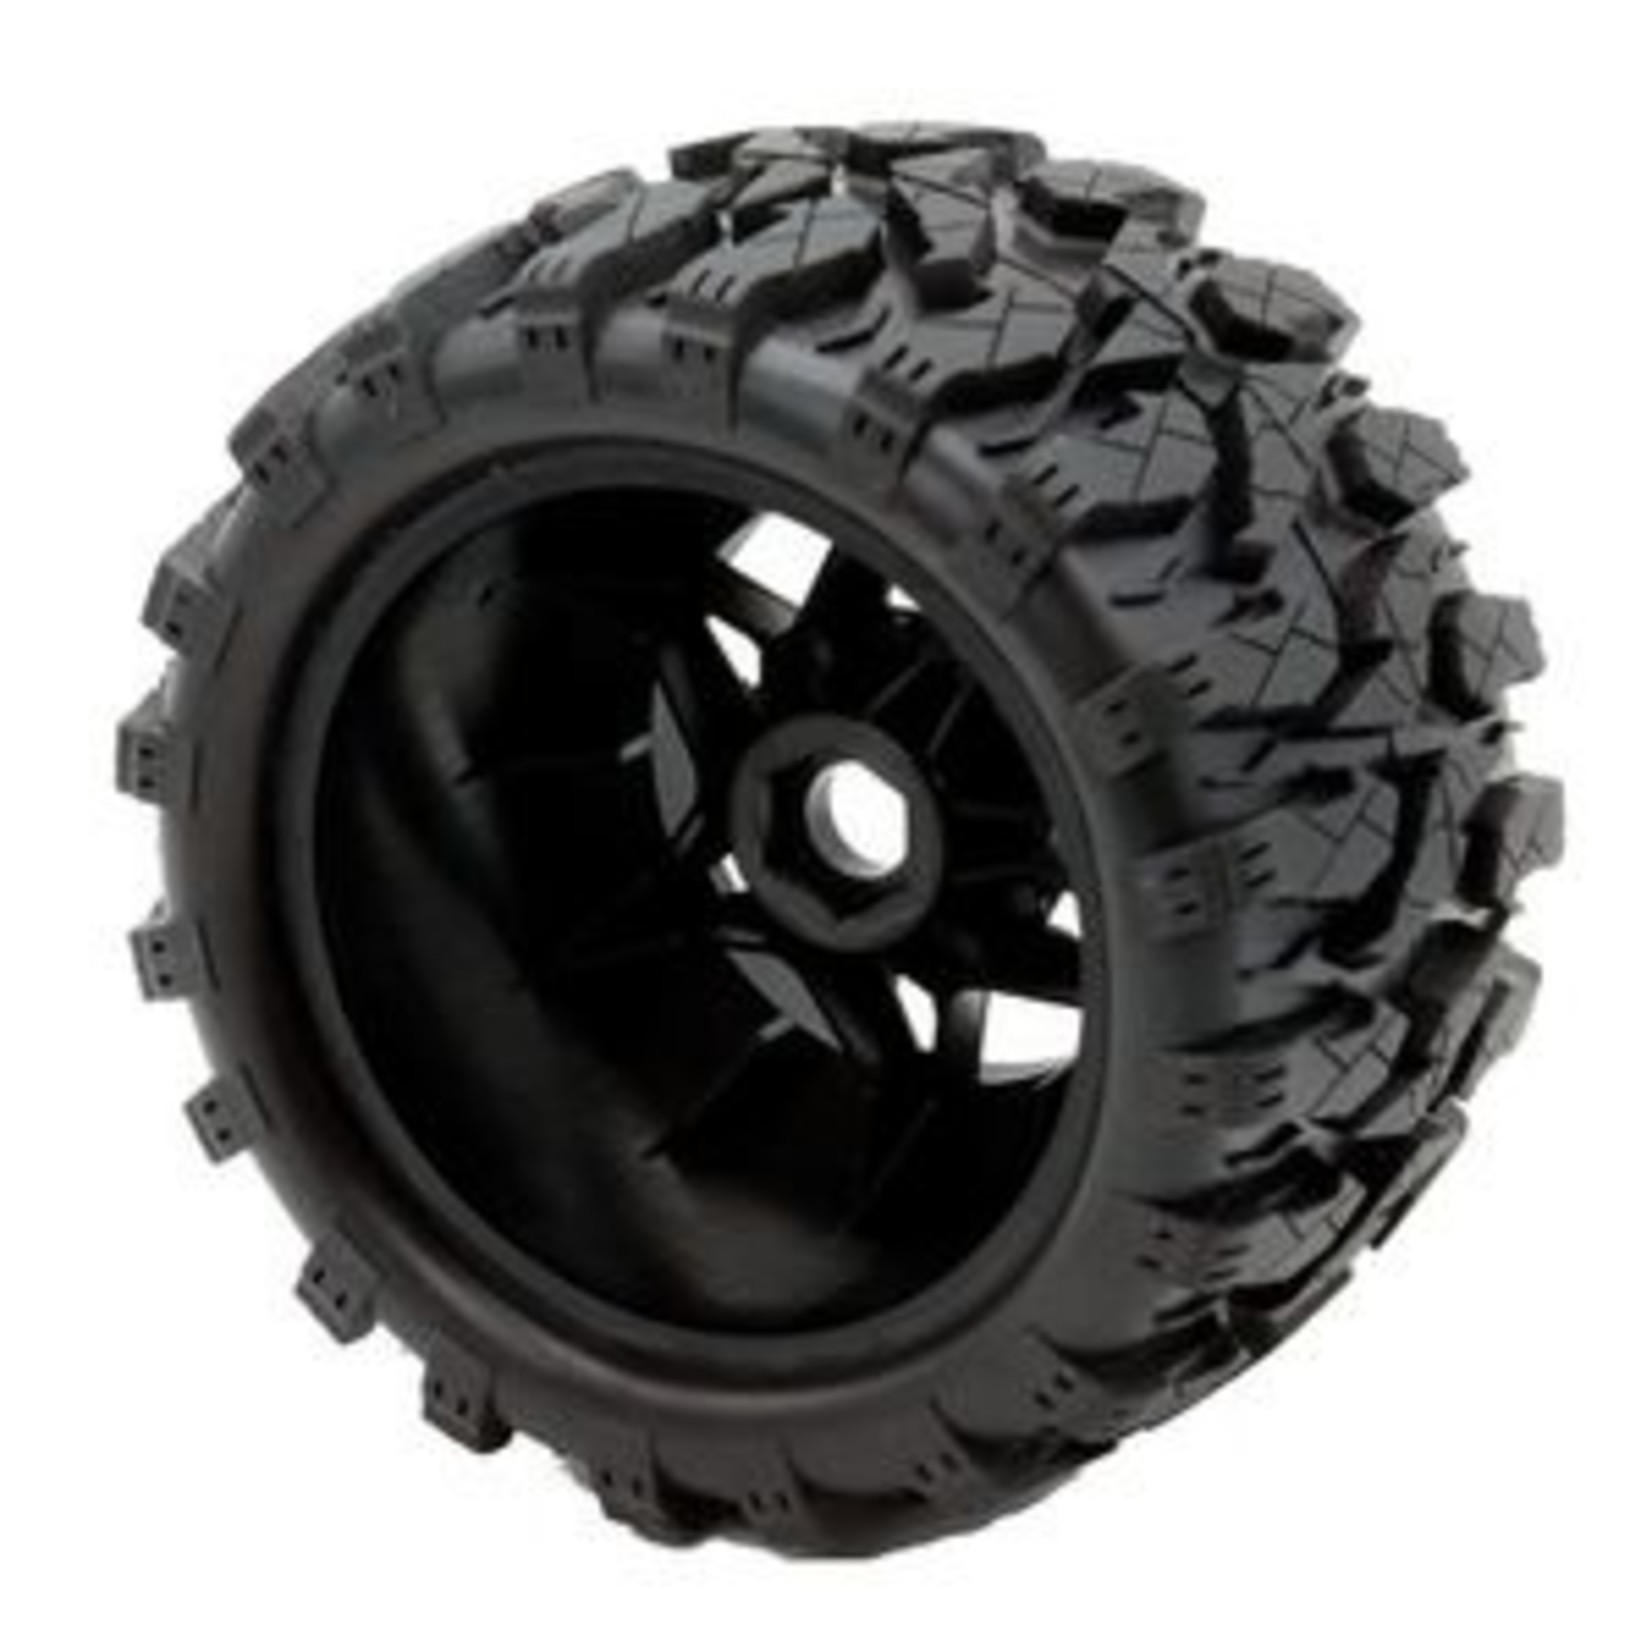 Power Hobby PHBPHT2383 Defender MX Belted All Terrain Tires Mounted 17mm Traxxas